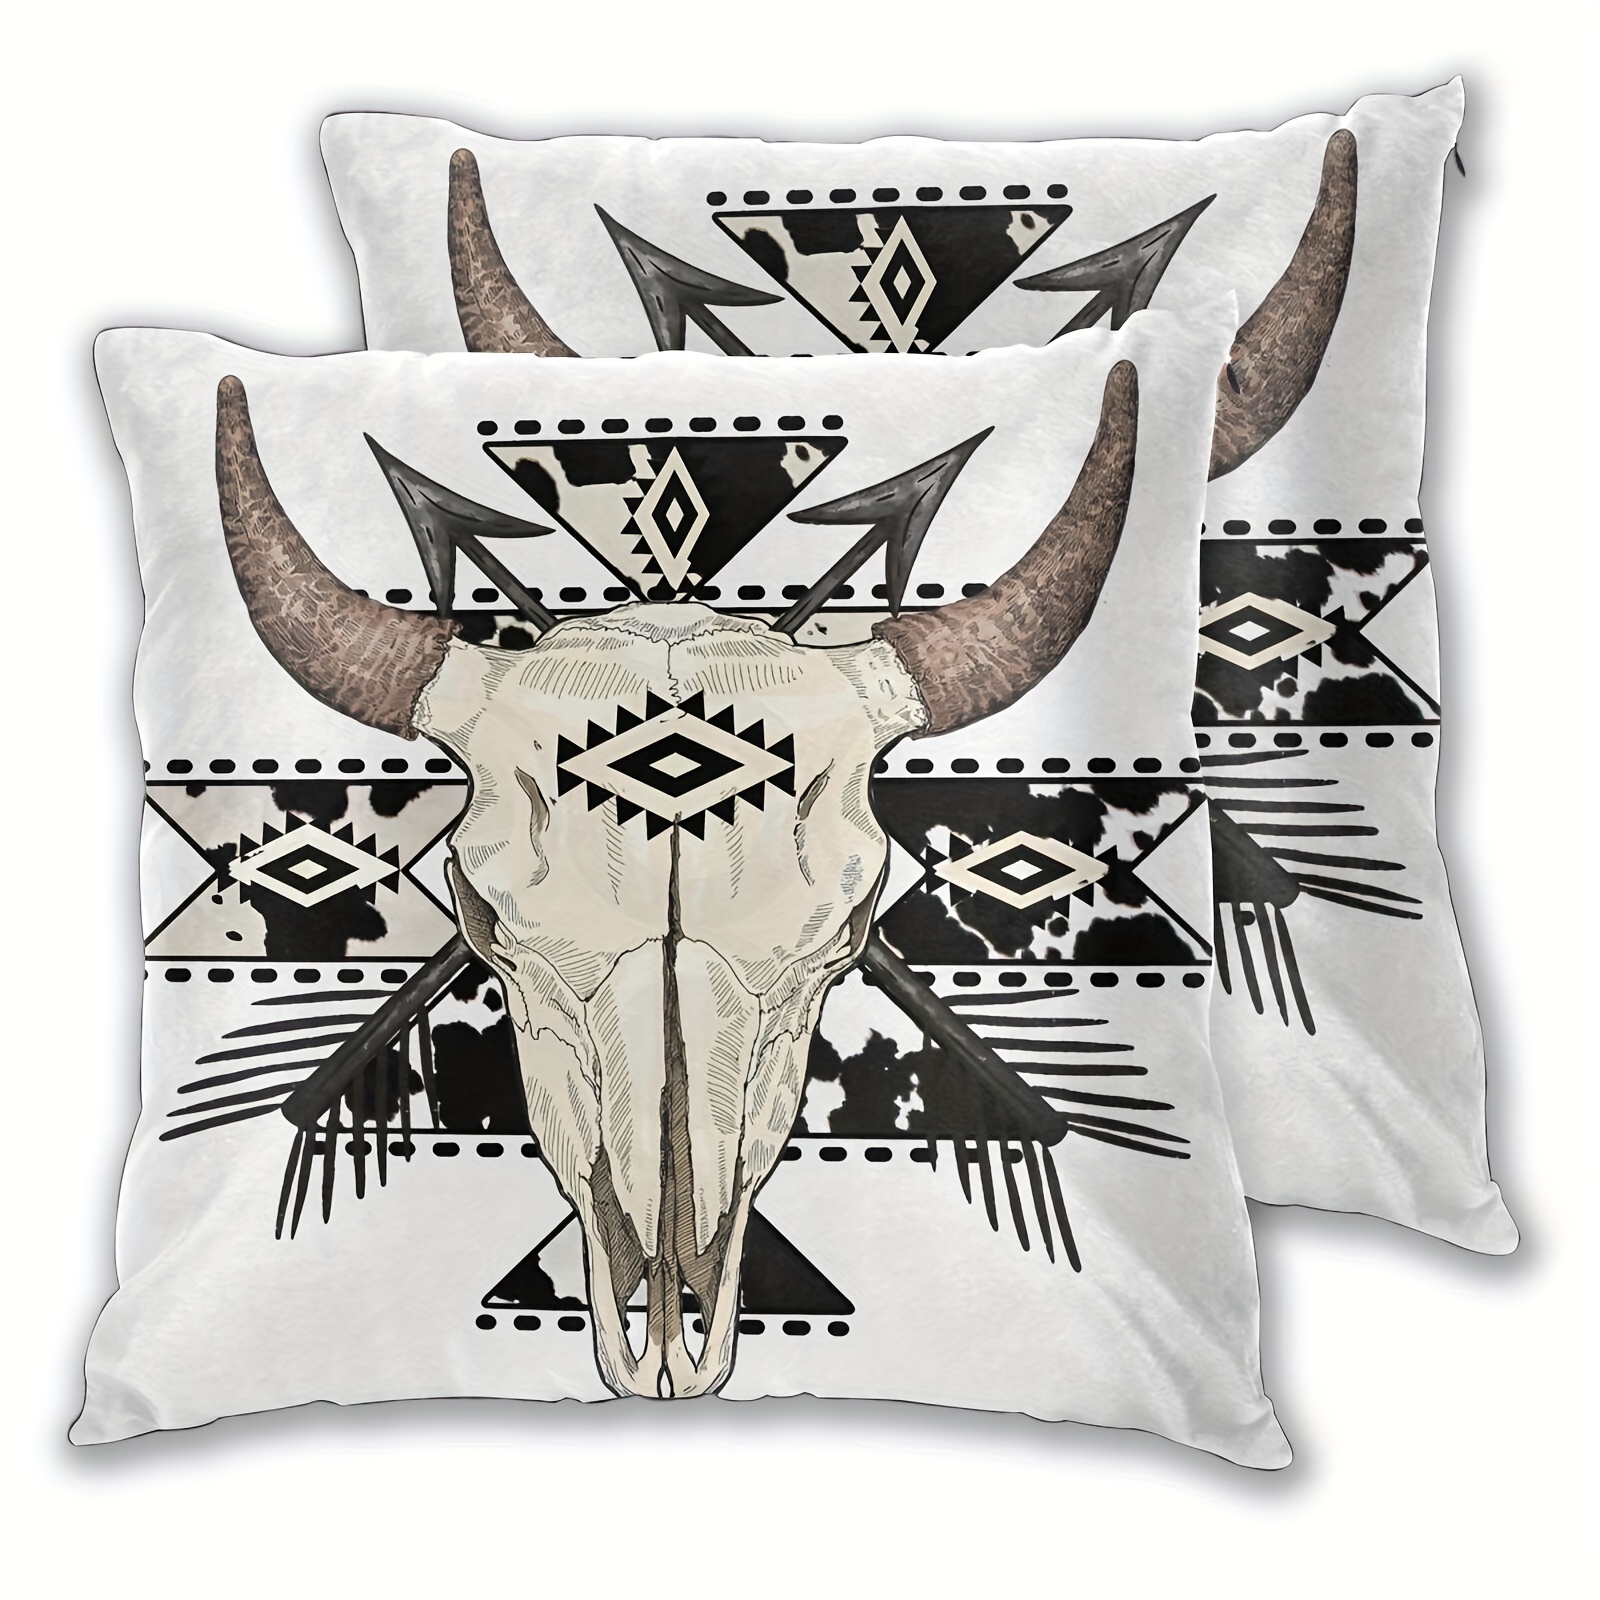 

2pcs Short Plush Boho Cow Print Aztec Western Bull Soft Throw Pillow Covers Cushion Cover Decor For Sofa Couch Bed 18x18 Inch (no Pillow Core)